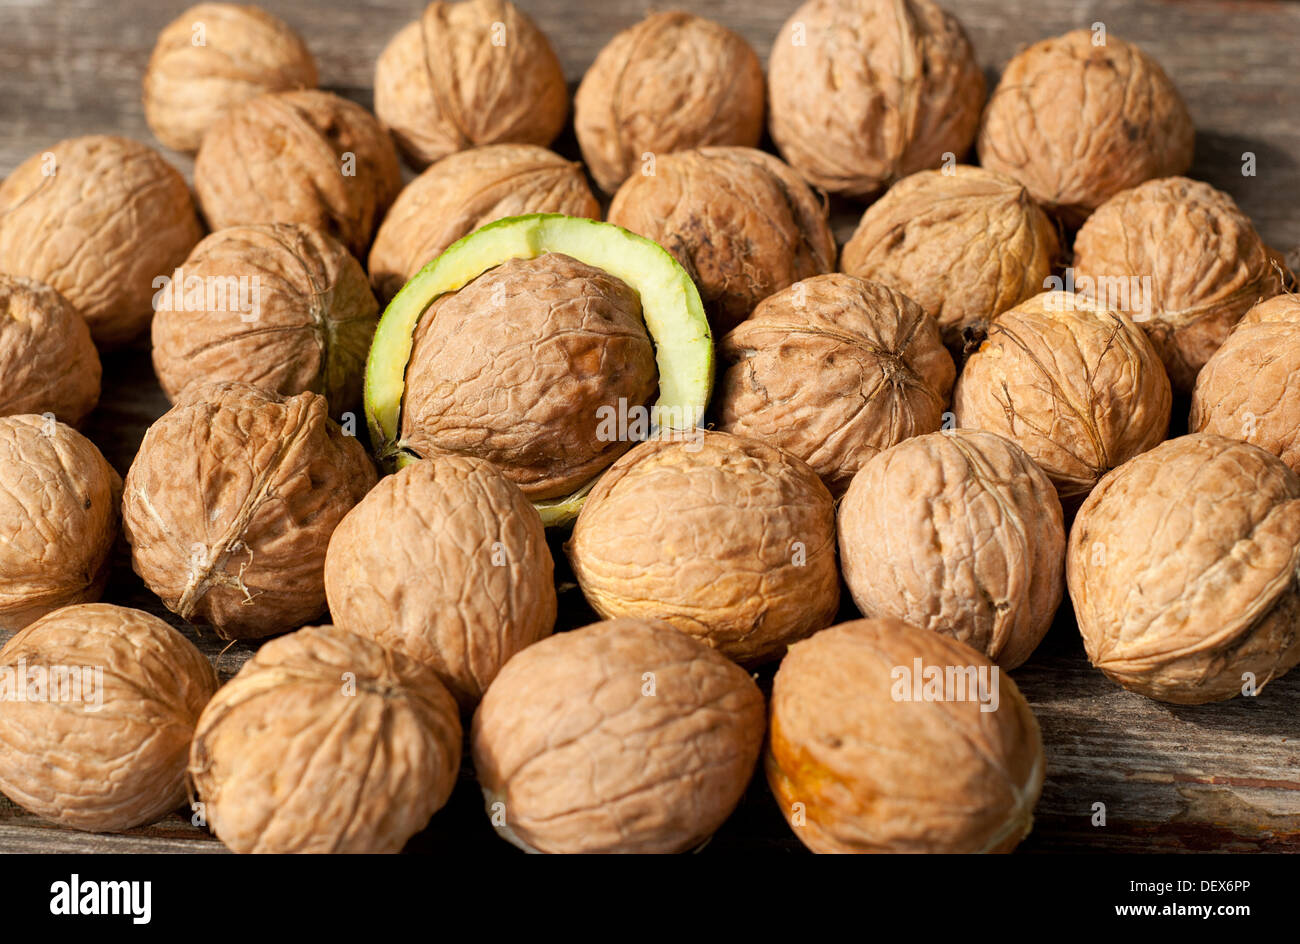 Walnuts on the table Stock Photo